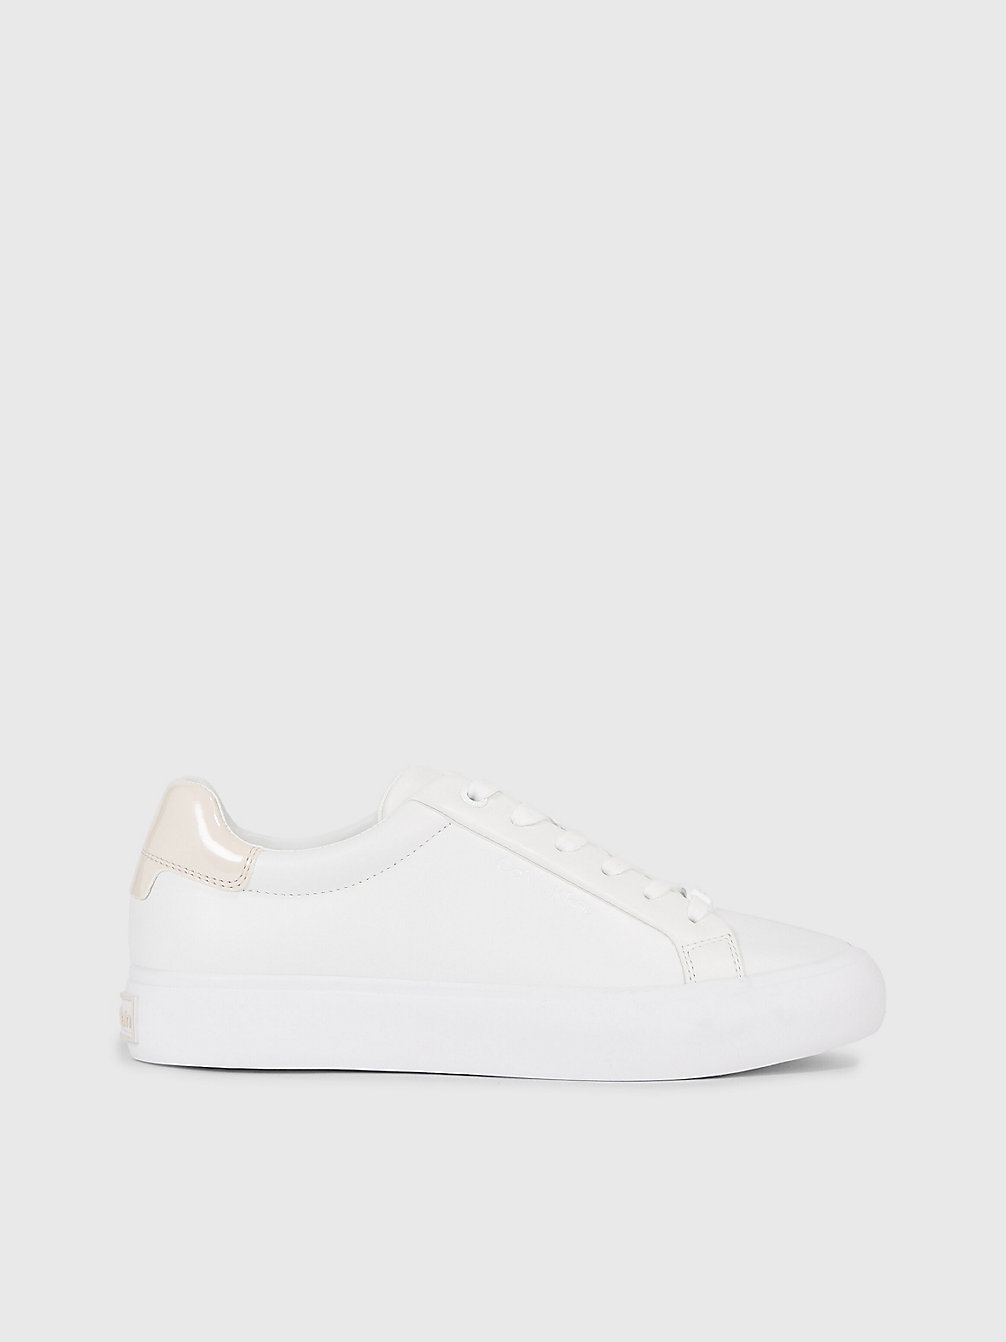 WHITE / CRYSTAL GRAY Leather Trainers undefined women Calvin Klein